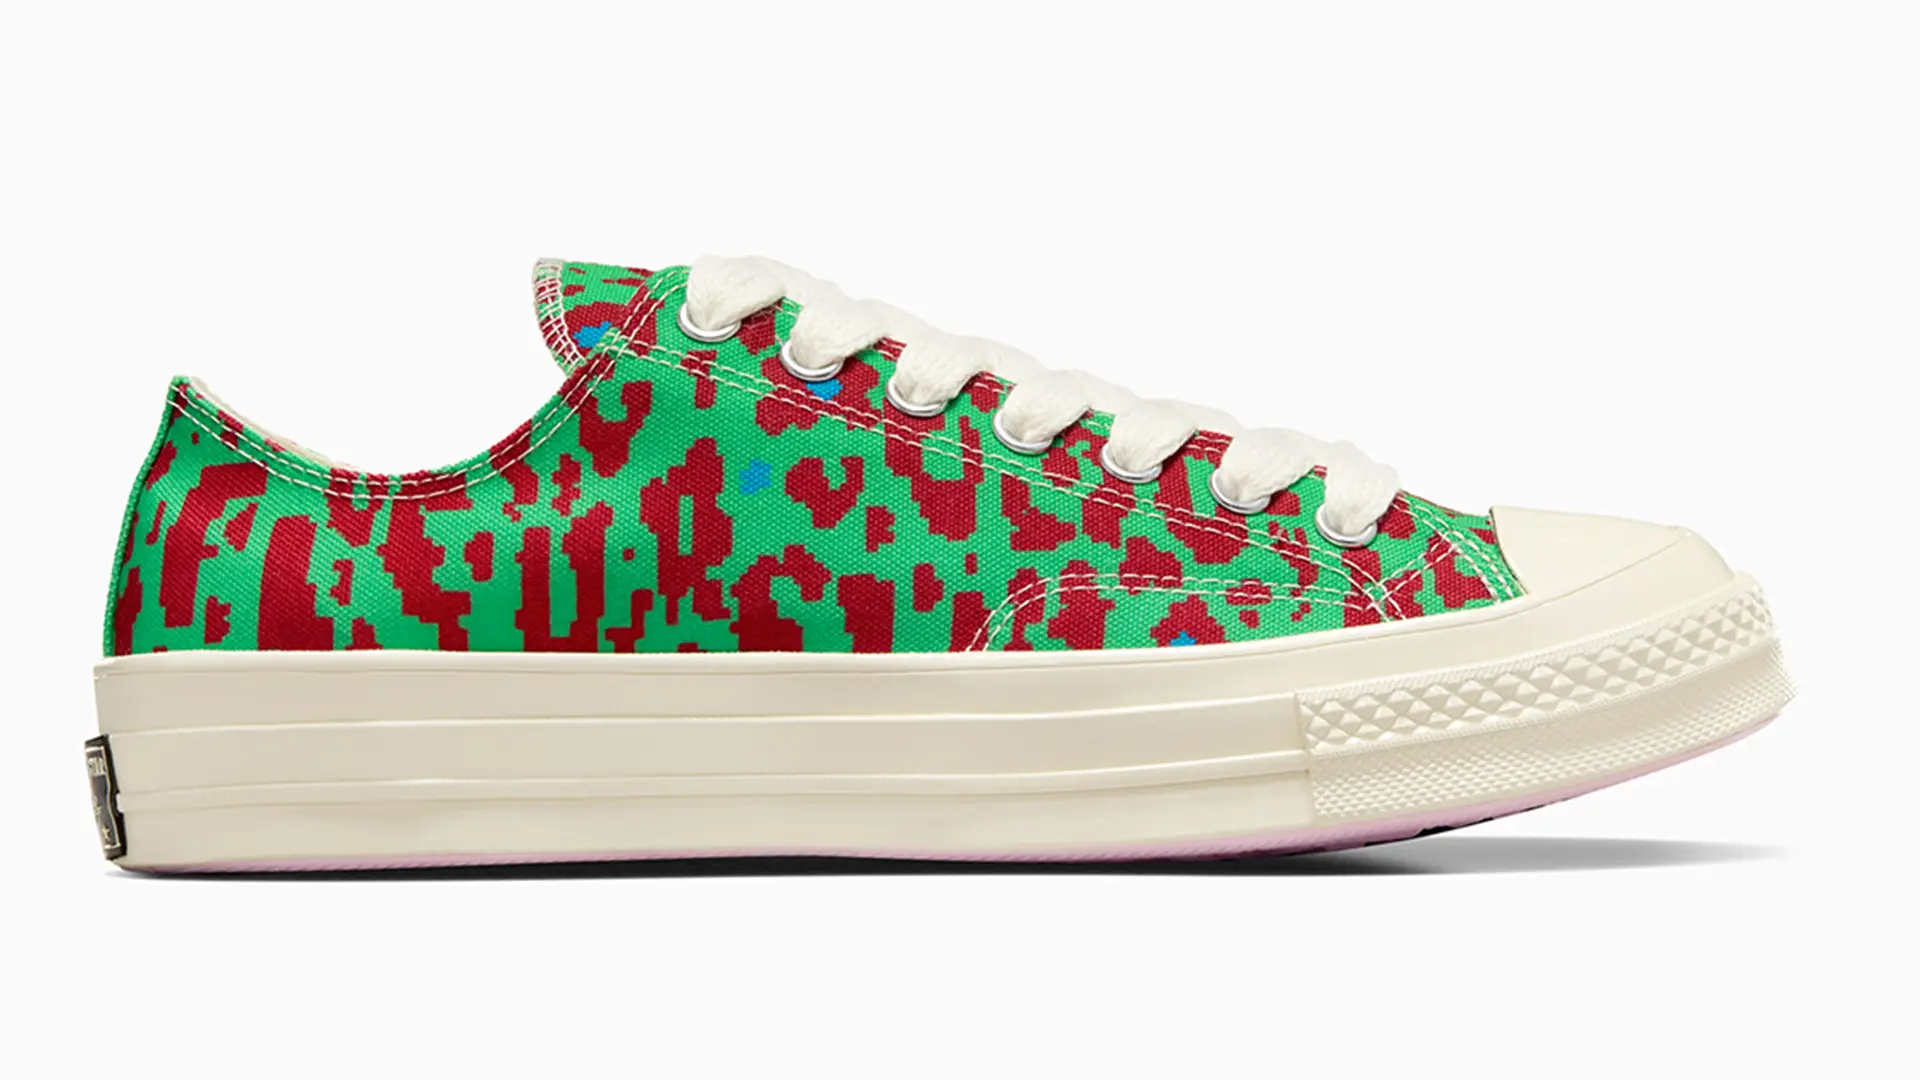 Tyler The Creator Jumps On the Digi Trend With New Converse x GOLF Le FLEUR Collab